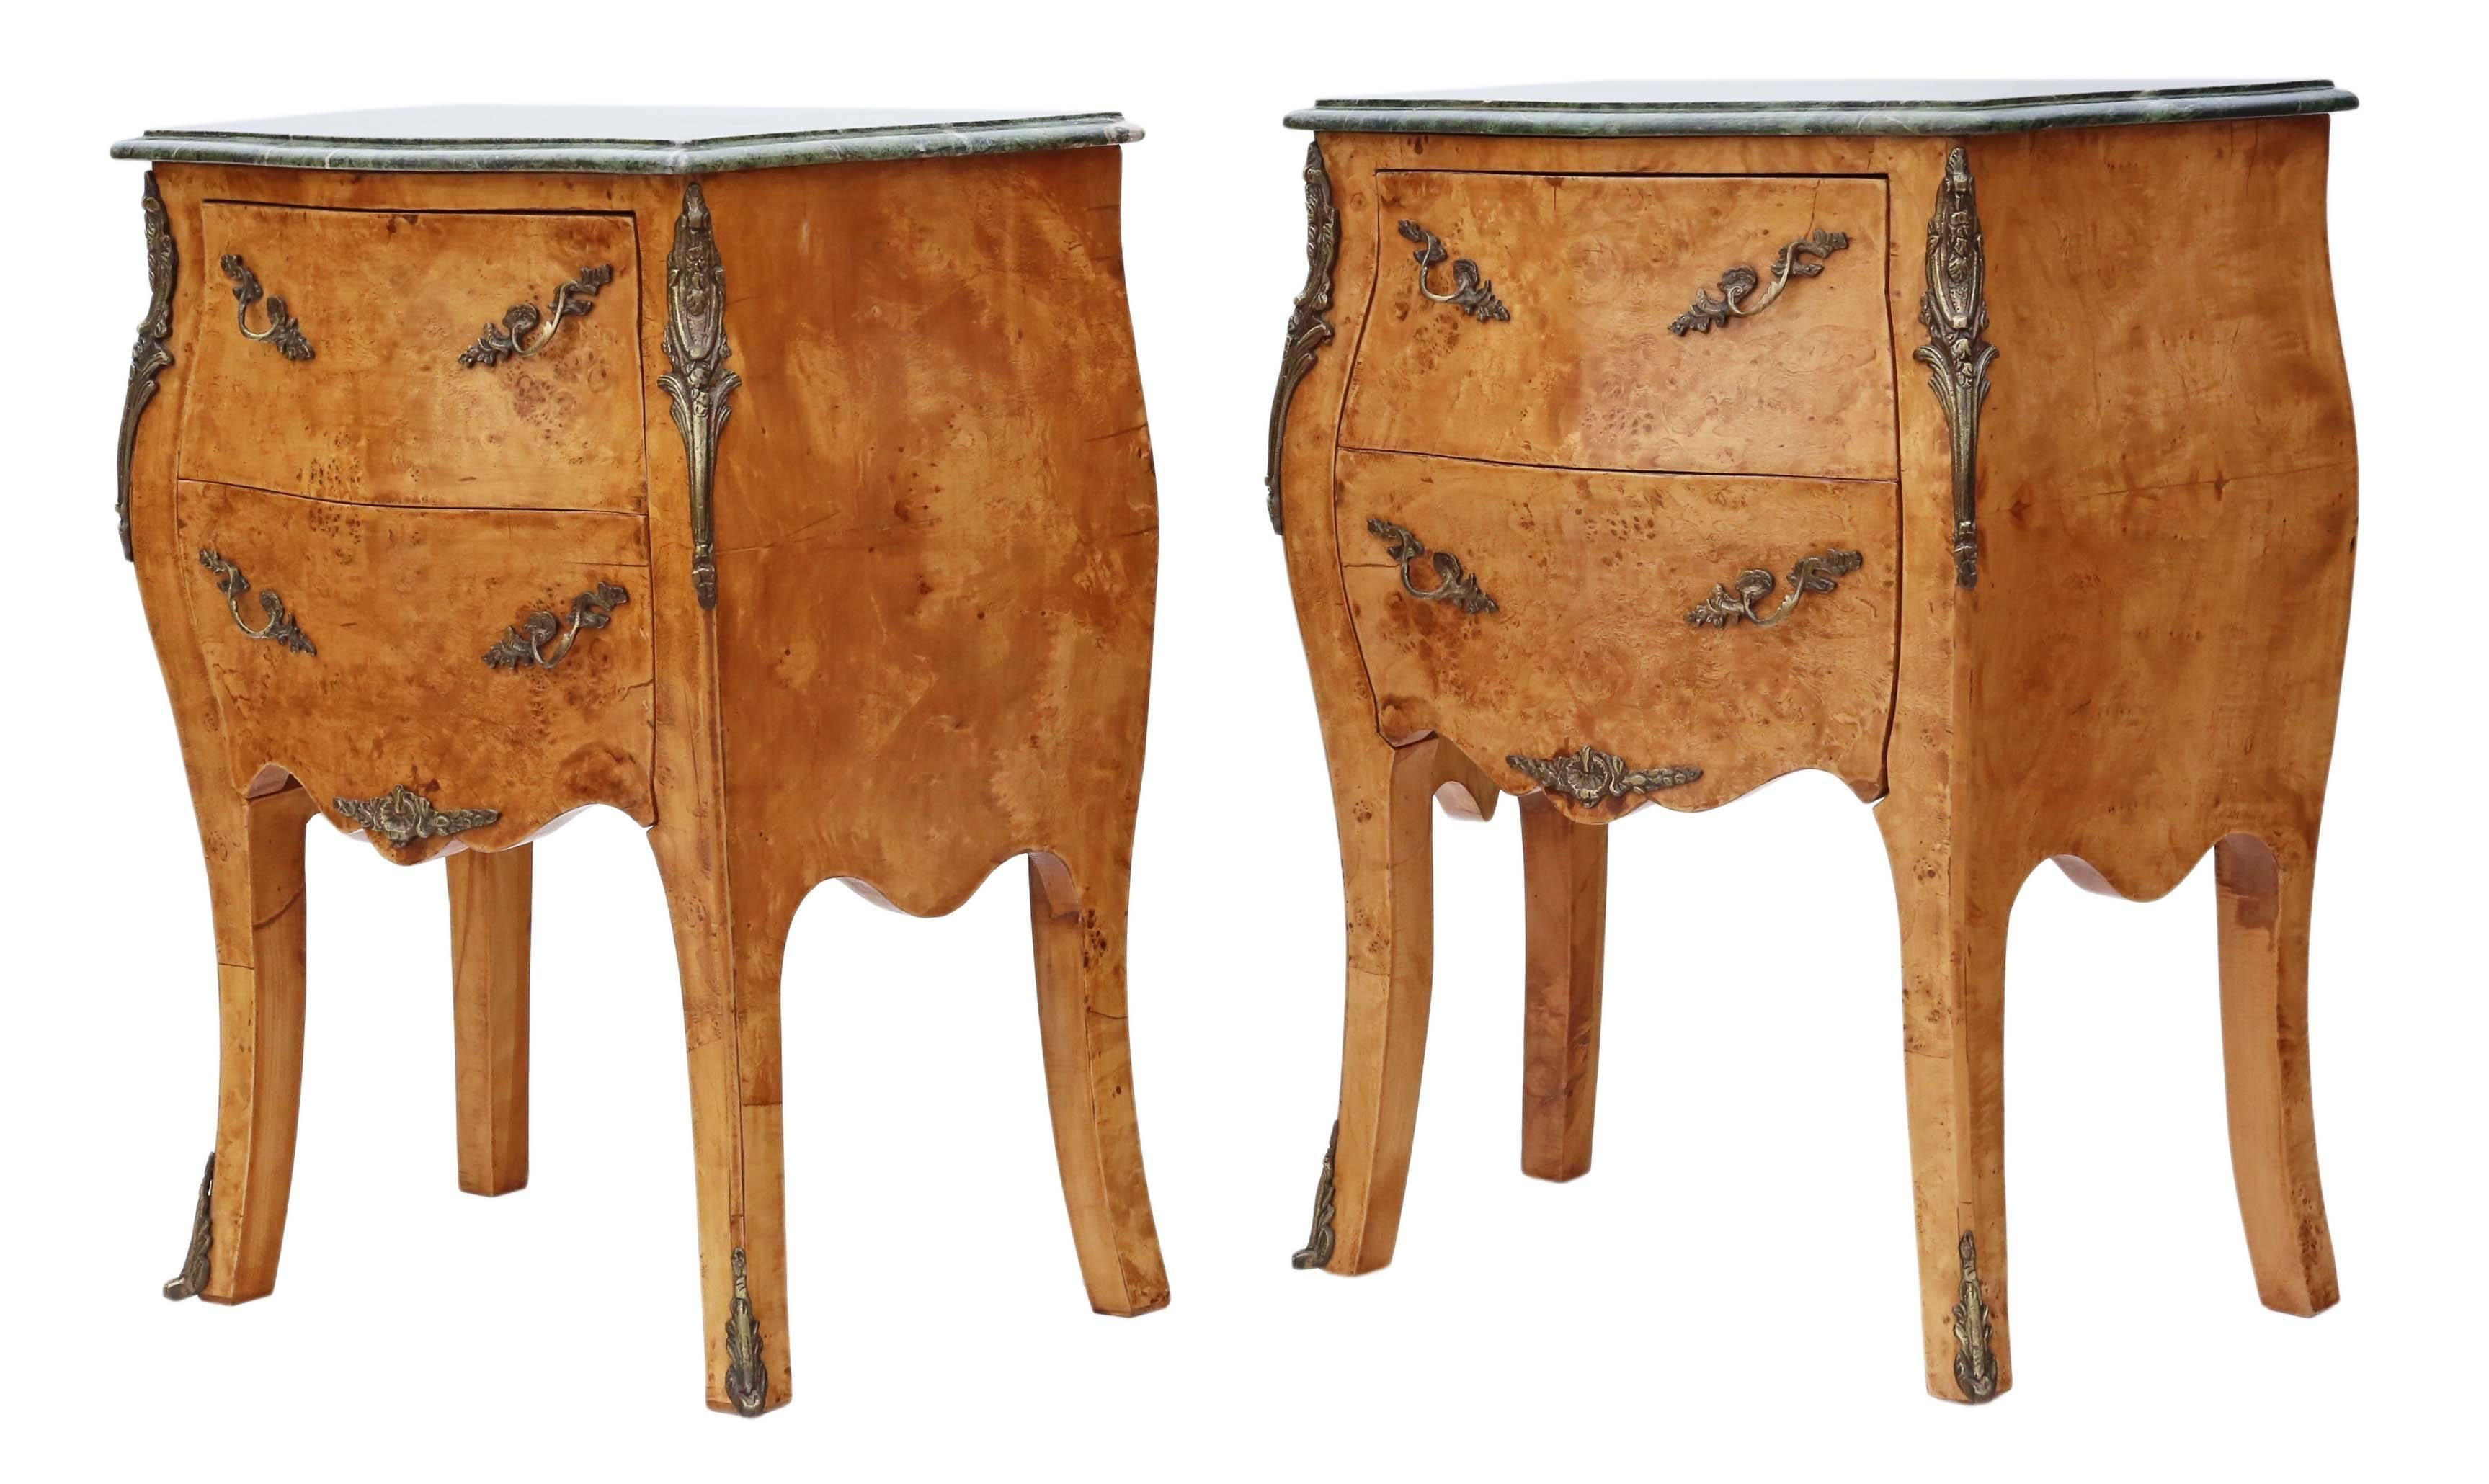 British Antique Pair of Bird's-Eye Maple and Marble Bombe Style Bedside Tables Chests For Sale